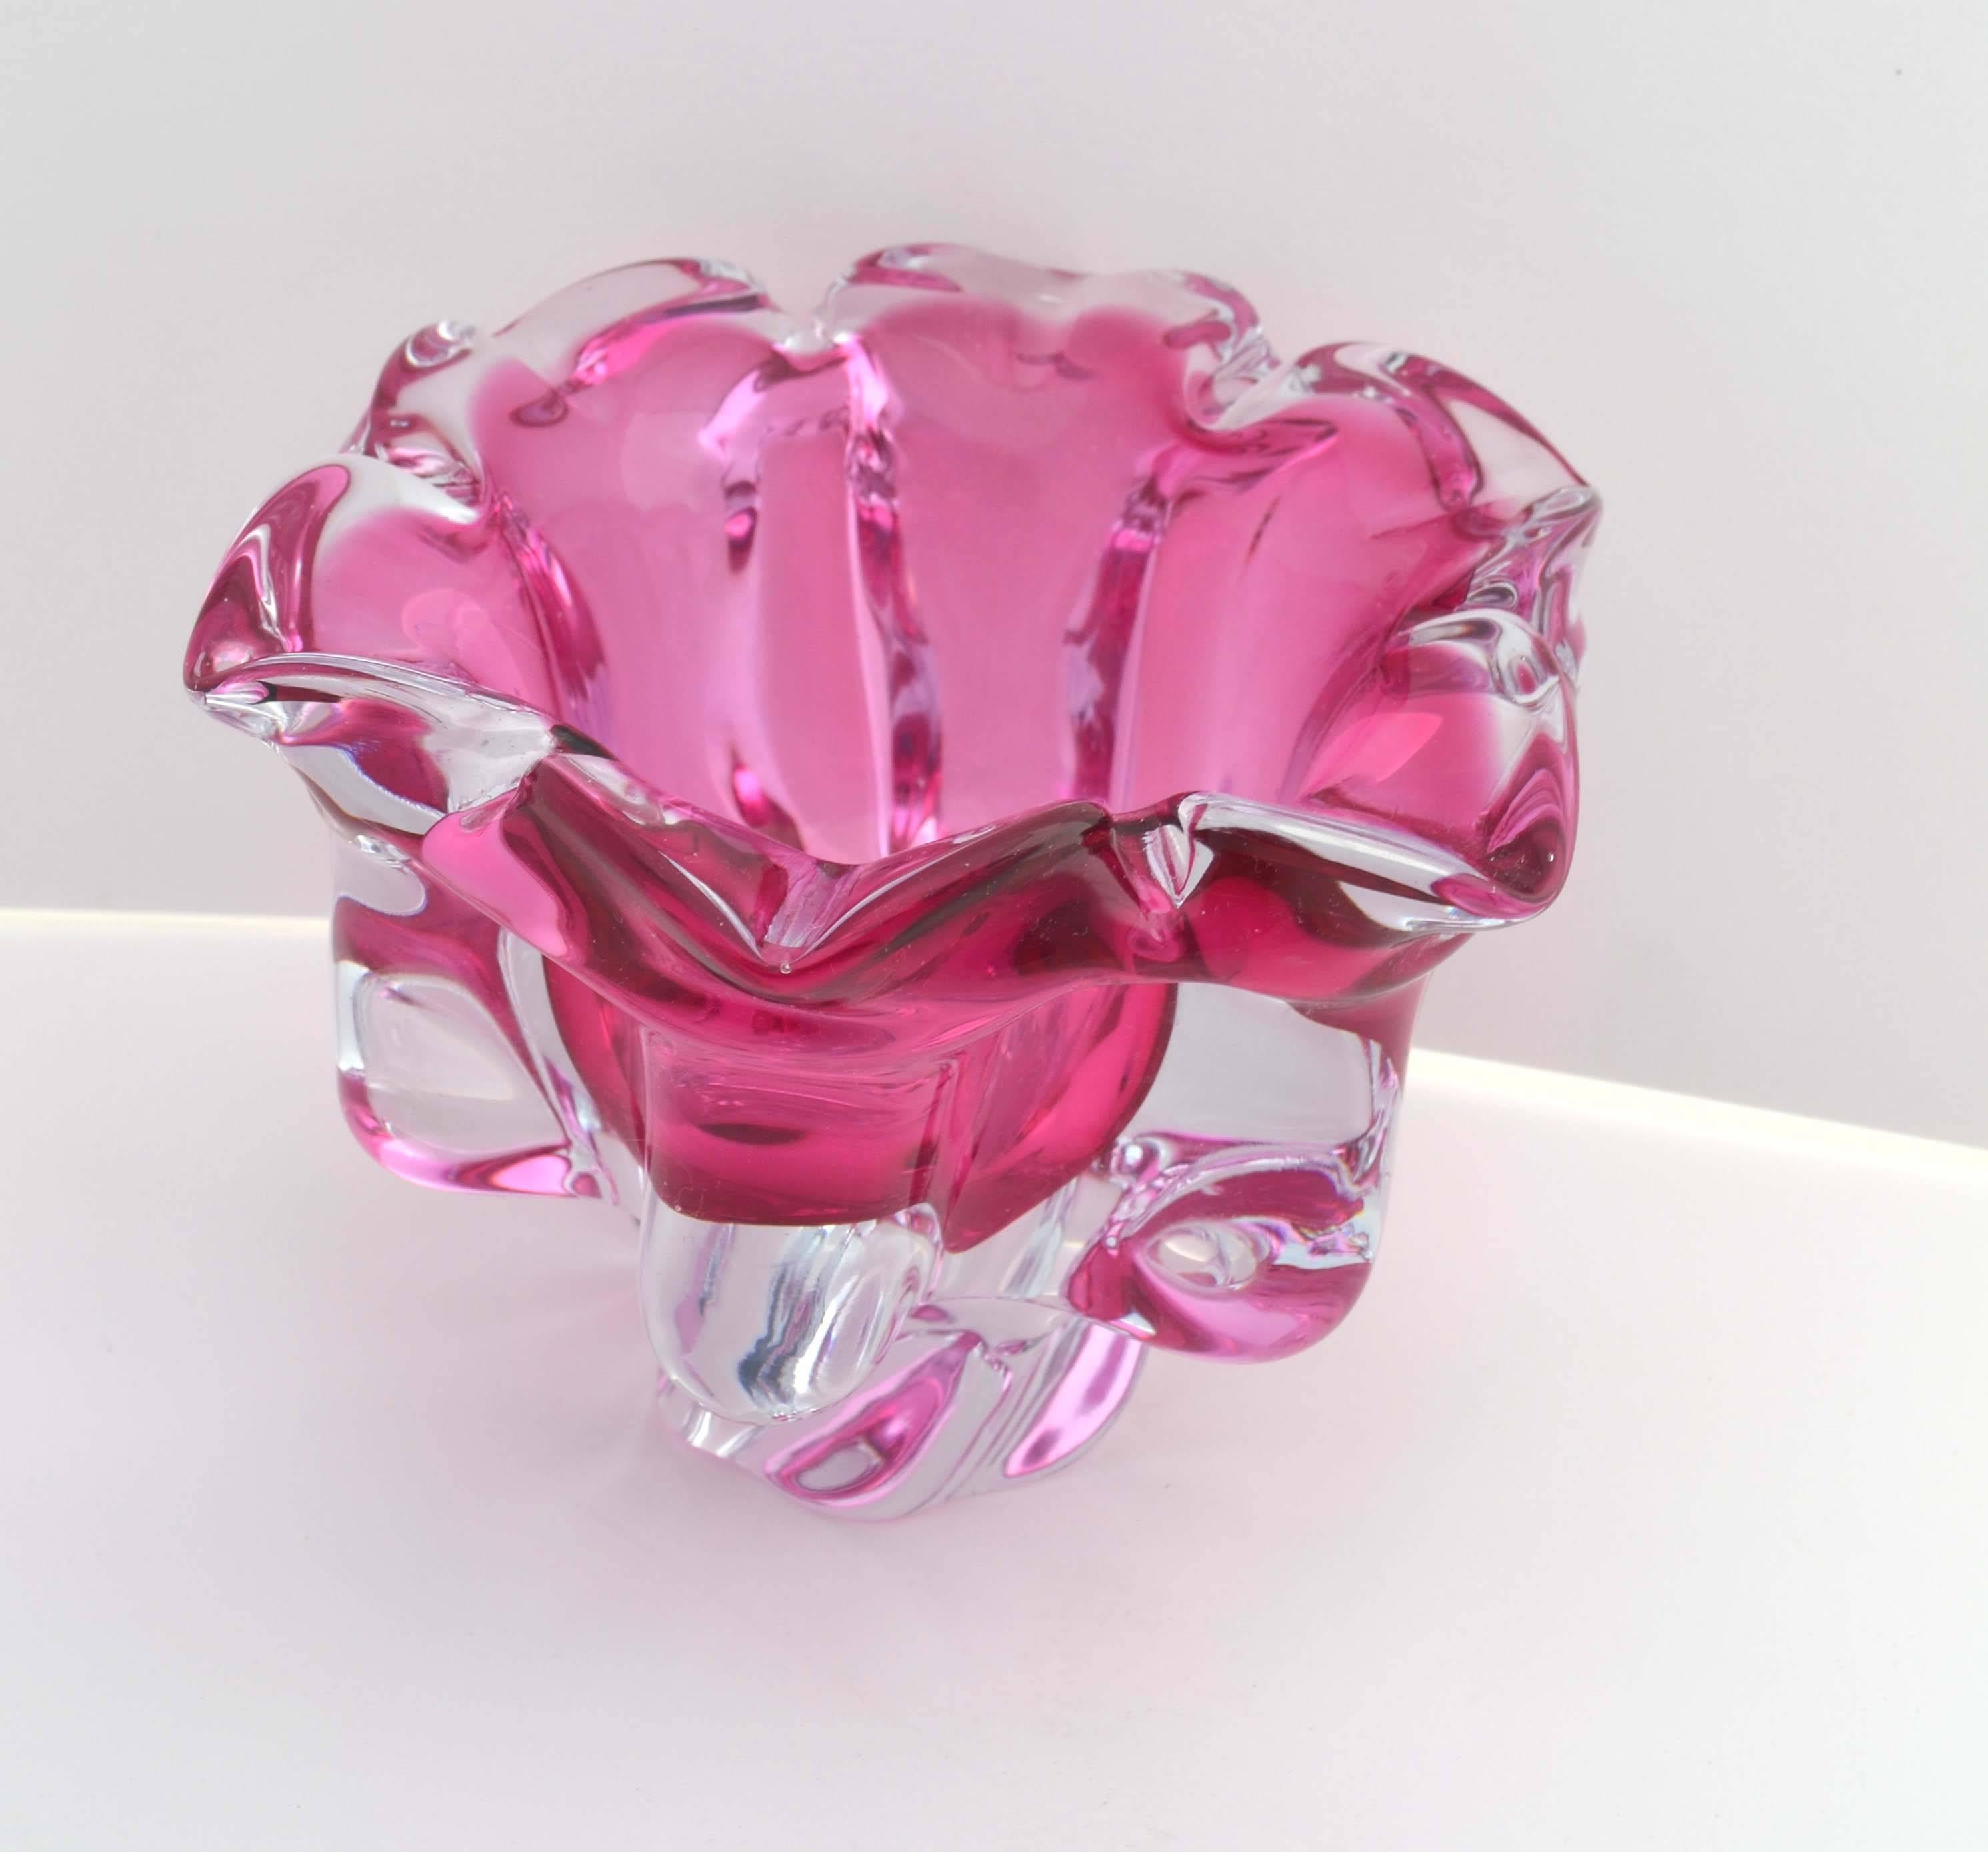 Sklo Union Chribska Glassworks, Vintage Pink Cranberry Sommerso Footed Bowl

Stunning mid century modern star-shaped footed bowl in clear and pink/cranberry by Josef Hospodka (Czechoslavkian, 1923-1989) of SKLO Union Chribska Glassworks, circa 1970.